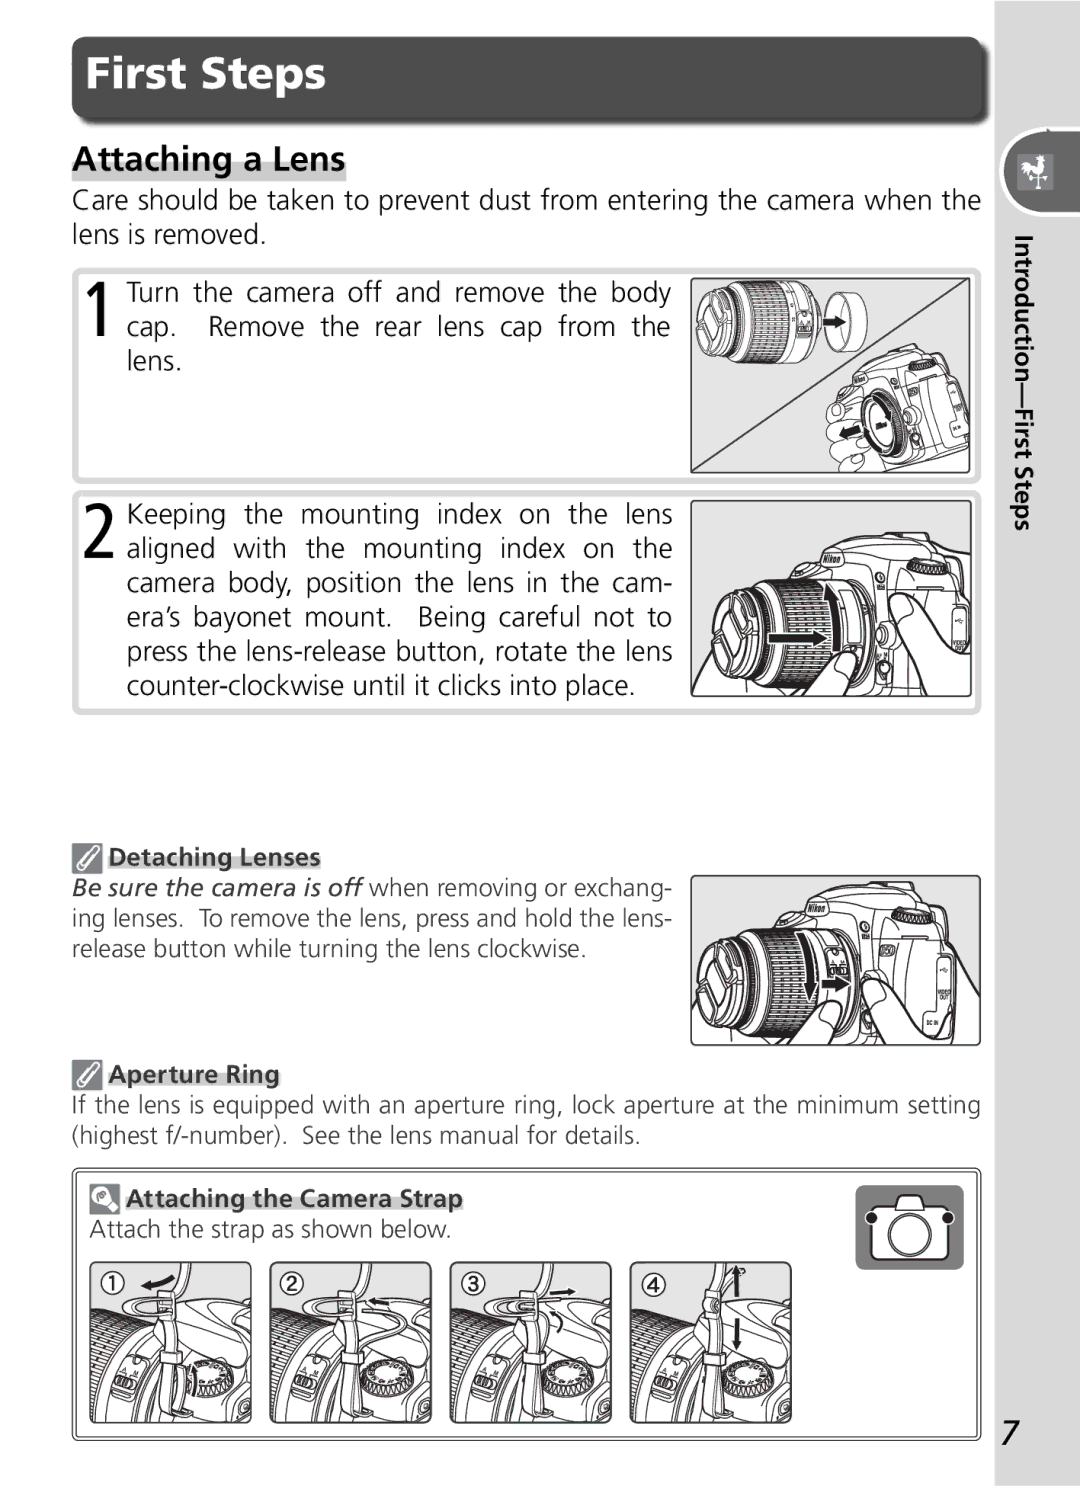 Nikon D50 manual First Steps, Attaching a Lens, Detaching Lenses, Aperture Ring, Attaching the Camera Strap 